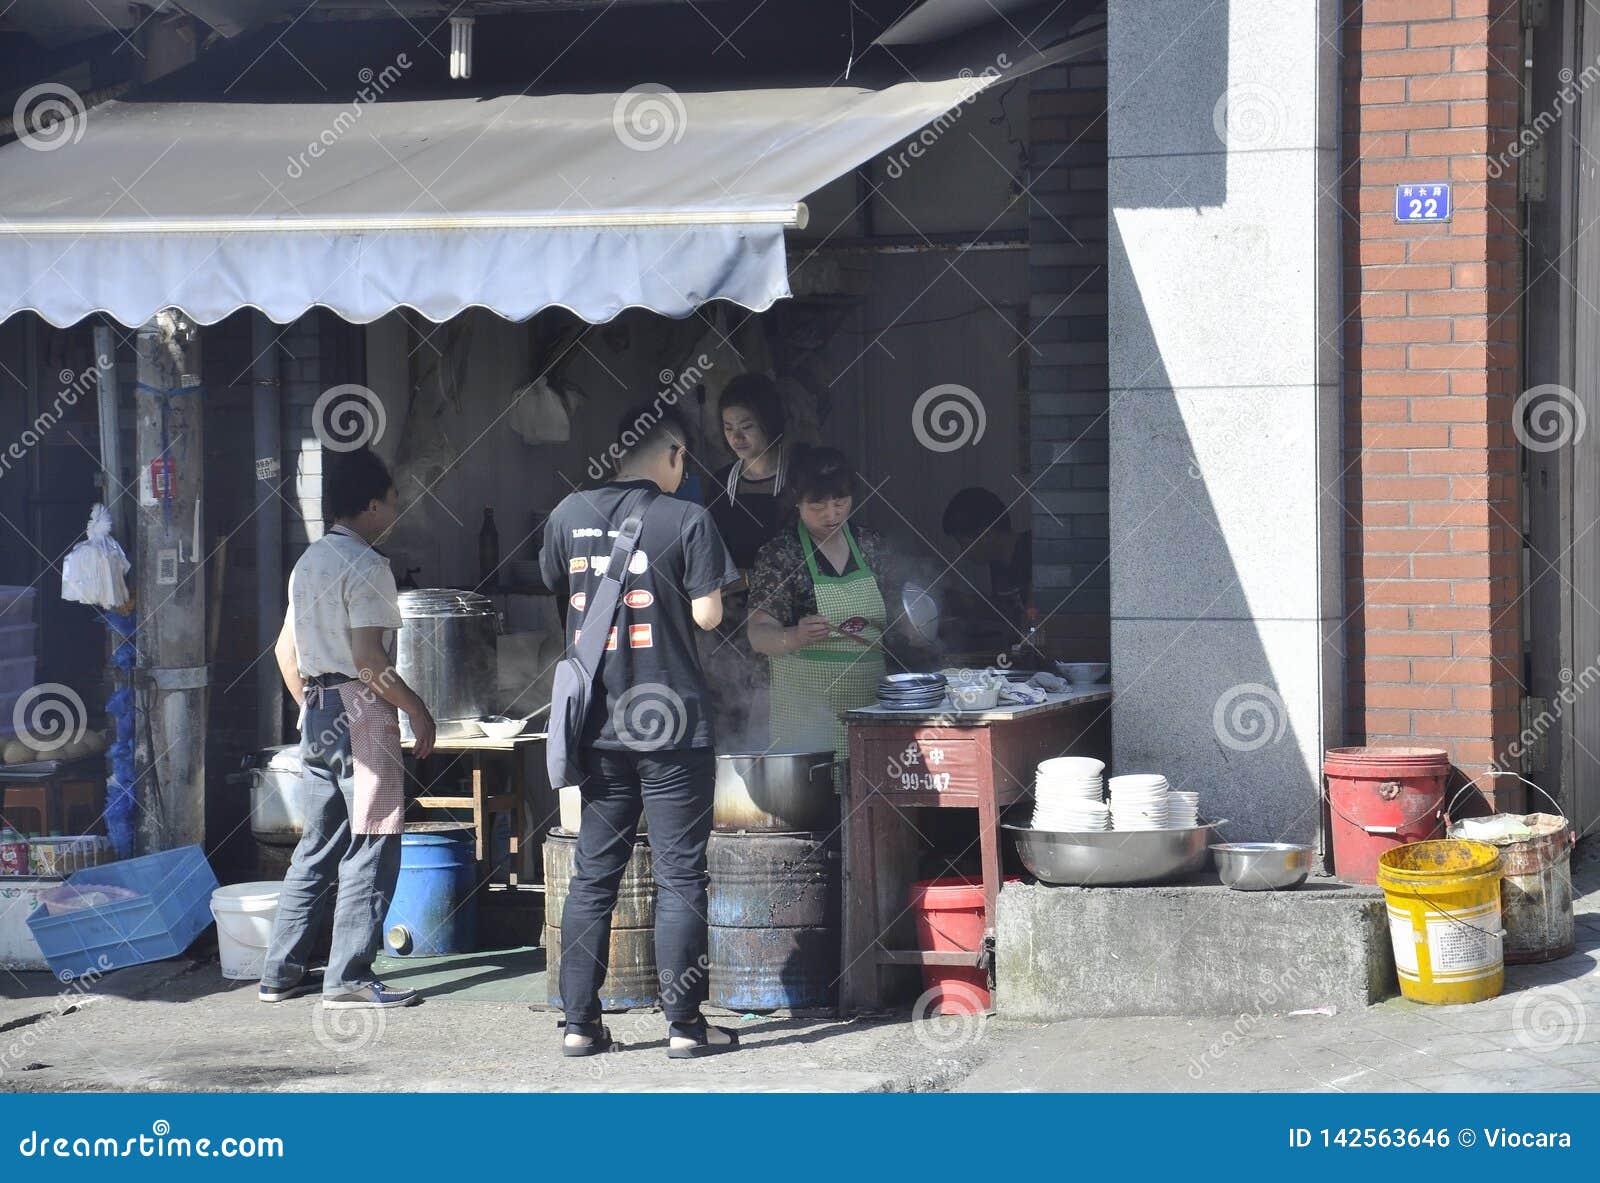 Hangzhou 4th May Traditional Food Market In A Slum Area From